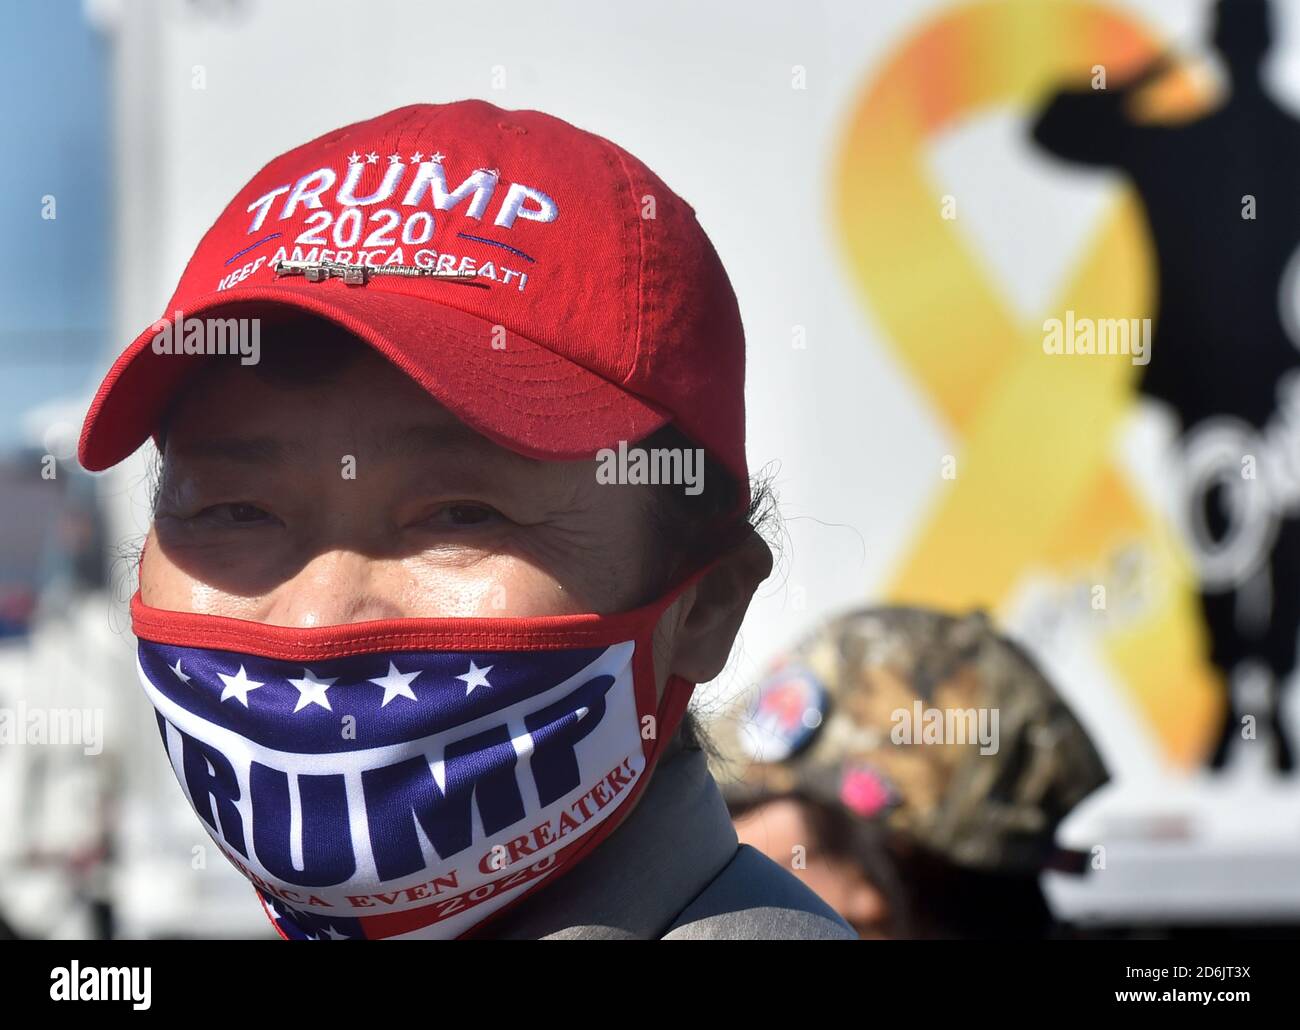 Dunmore, United States. 17th Oct, 2020. A supporter of President Donald Trump, wearing a hat and a face mask for Trump with a gun pin at the Road Scholar, Trucking company during the rally.Eric Trump speaks to approximately 400 people in Dunmore, PA, it's the city adjacent to Joe Biden's childhood home of Scranton. March of the audience was made up of a group called Japan 4 Donald Trump, as Eric Trump speaks of gun rights and Amy Coney Barrett. Credit: SOPA Images Limited/Alamy Live News Stock Photo